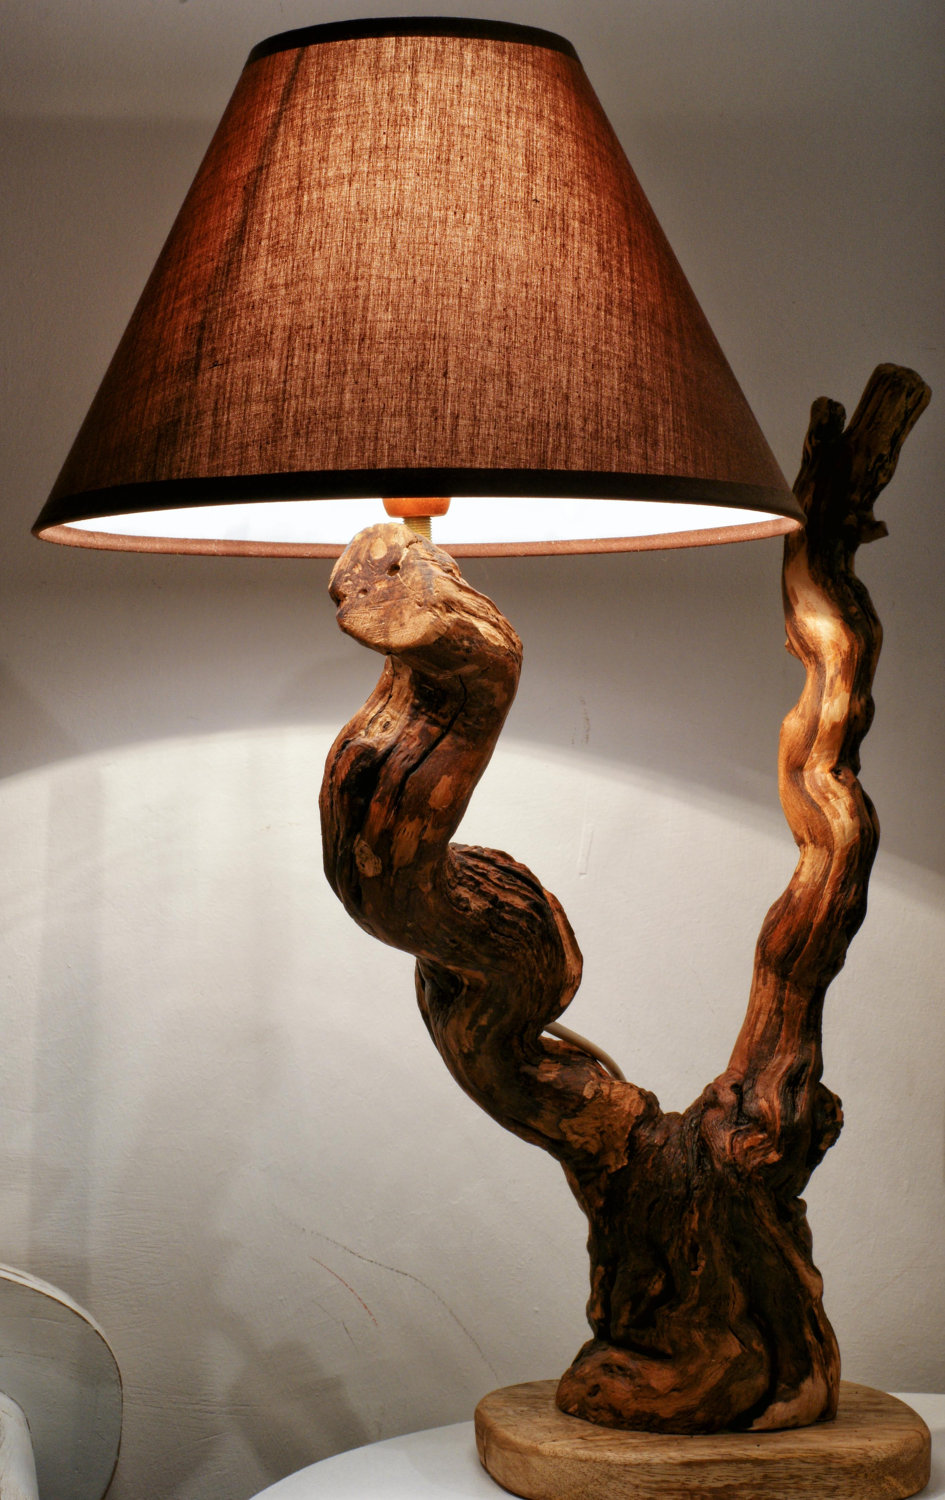 il_fullxfull.342933877 Do You Like To Have A handmade Wooden Lamp?